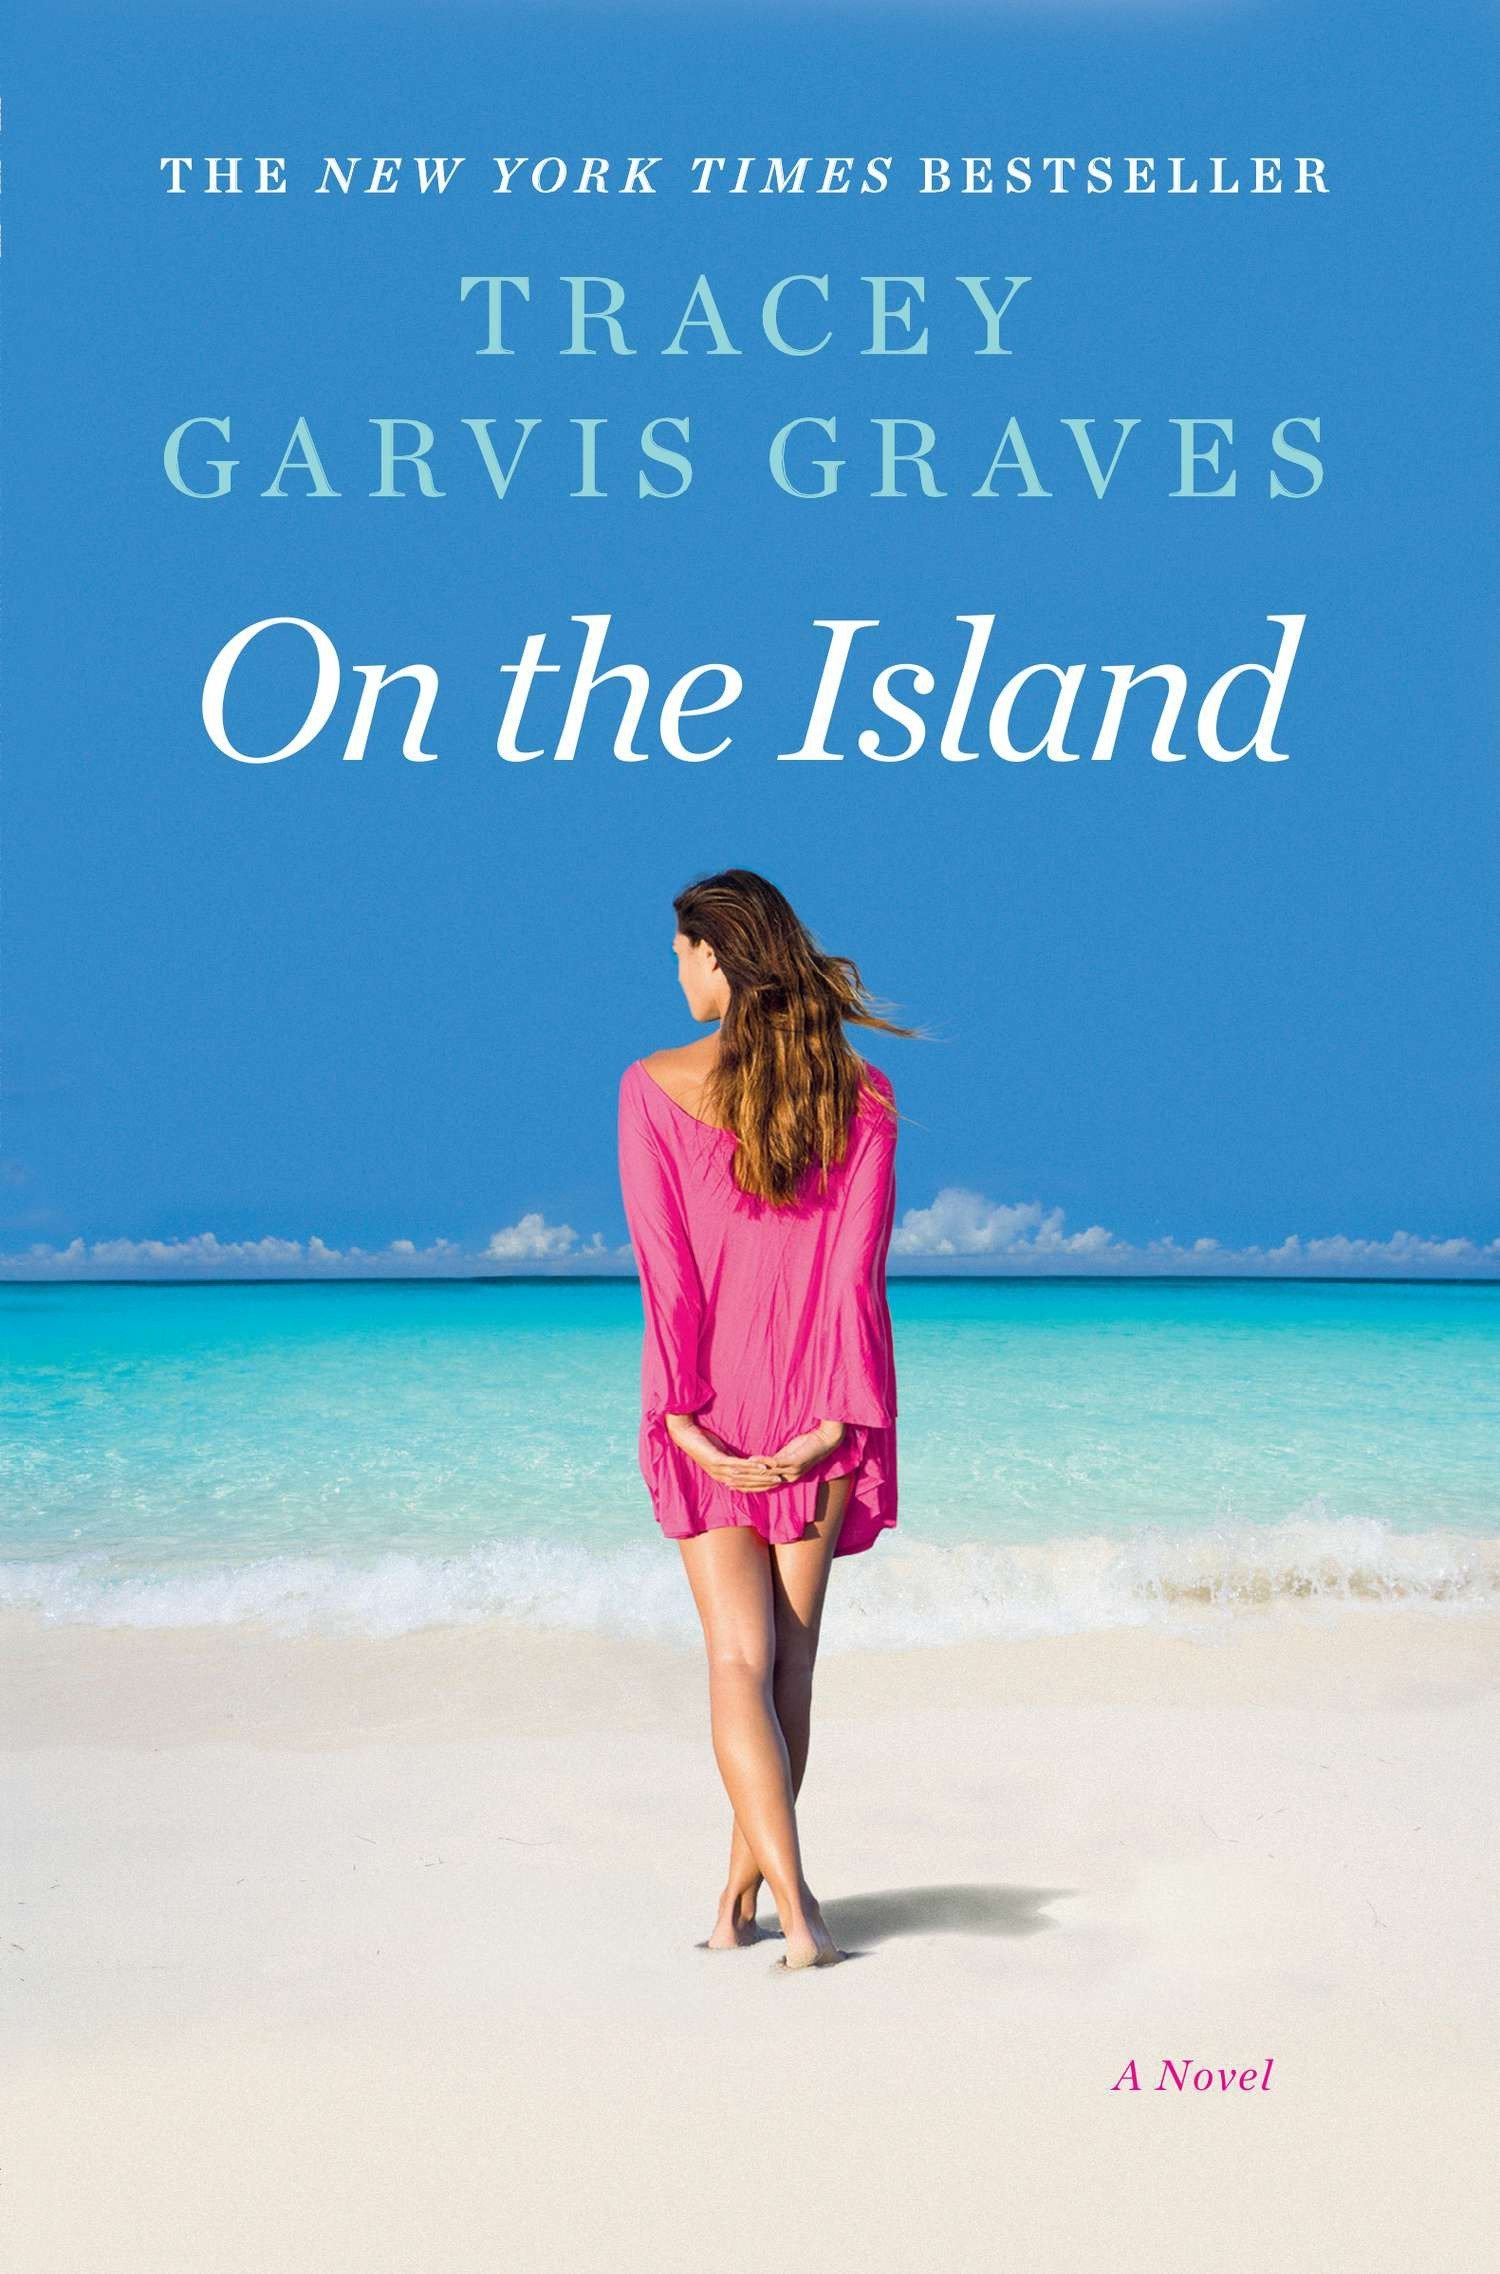 Amazon.com: On the Island (9780142196724): Tracey Garvis Graves: Books